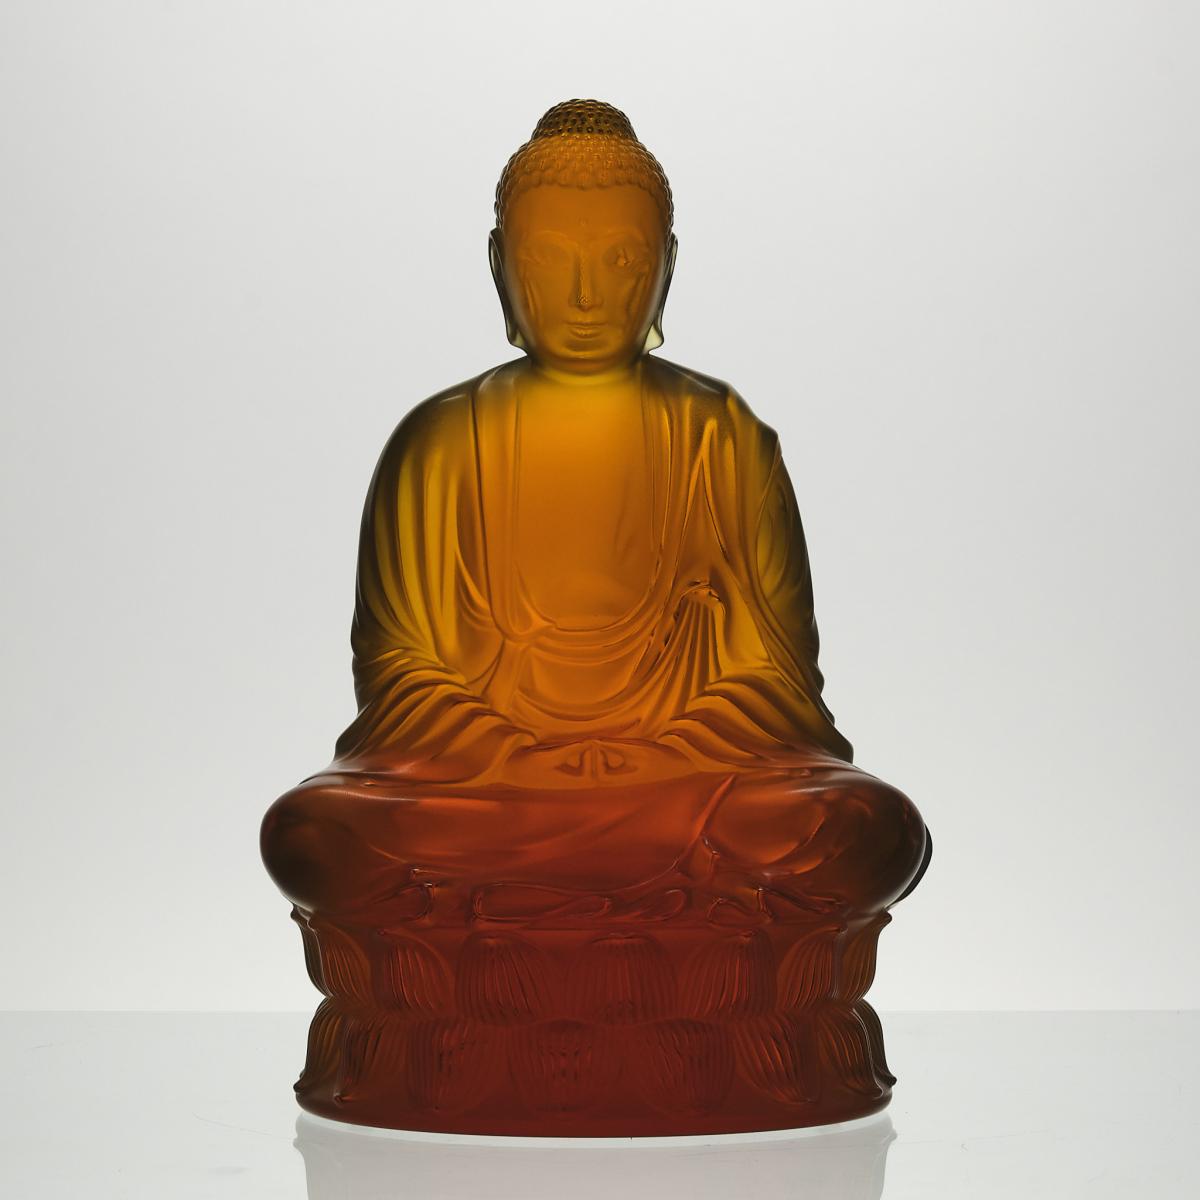 20th Century Crystal Glass Sculpture entitled "Seated Buddha" by Lalique Glass